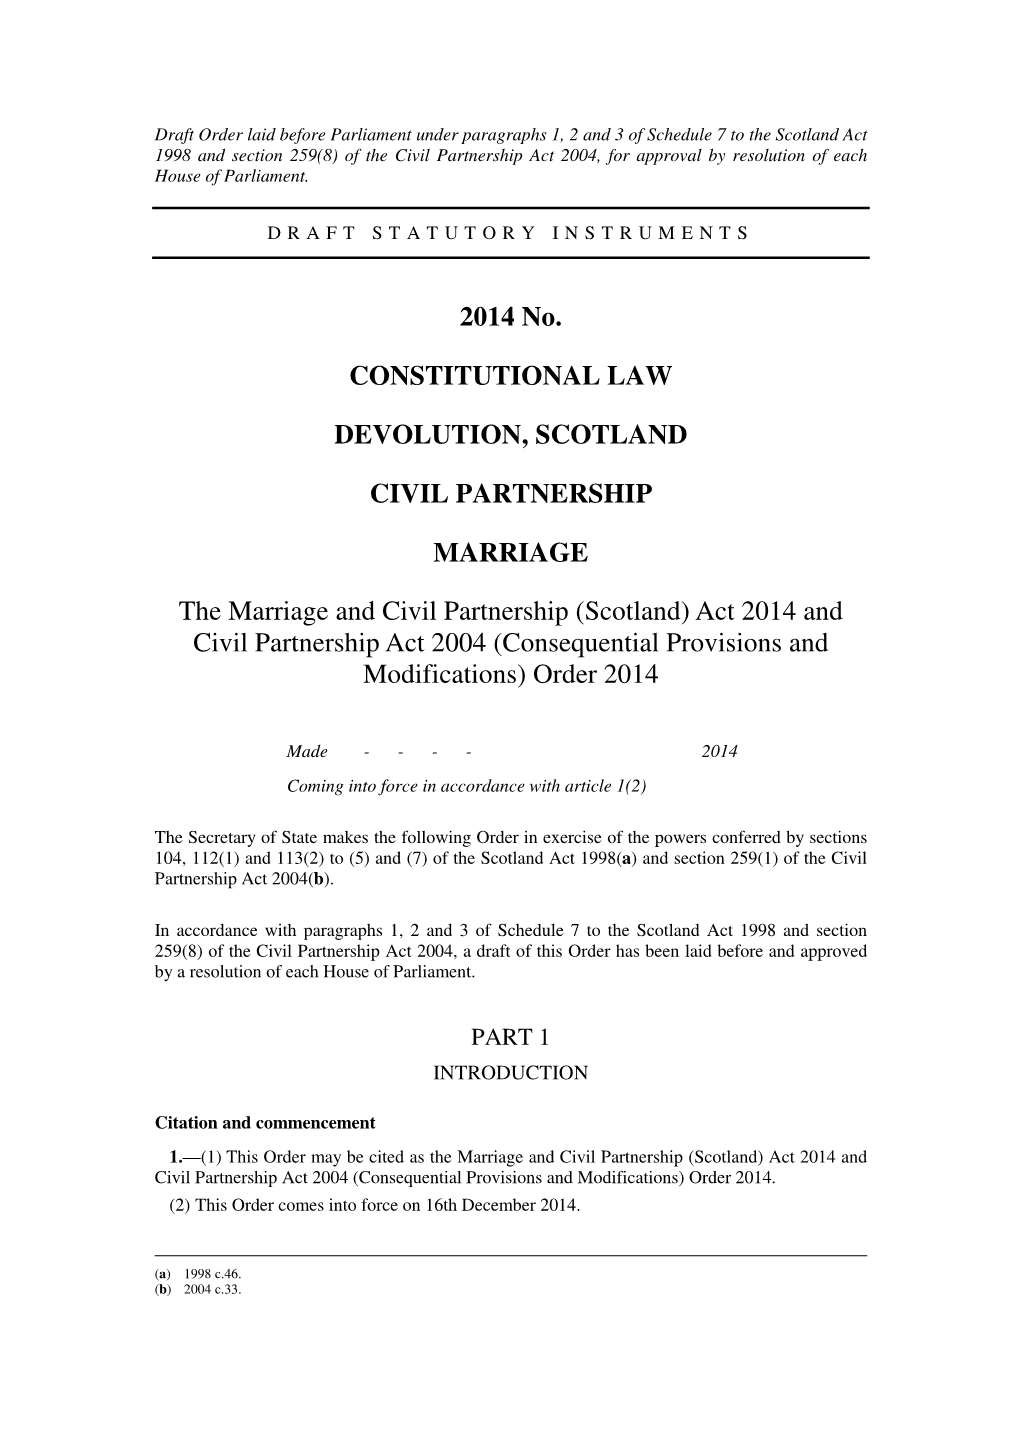 The Marriage and Civil Partnership (Scotland) Act 2014 and Civil Partnership Act 2004 (Consequential Provisions and Modifications) Order 2014